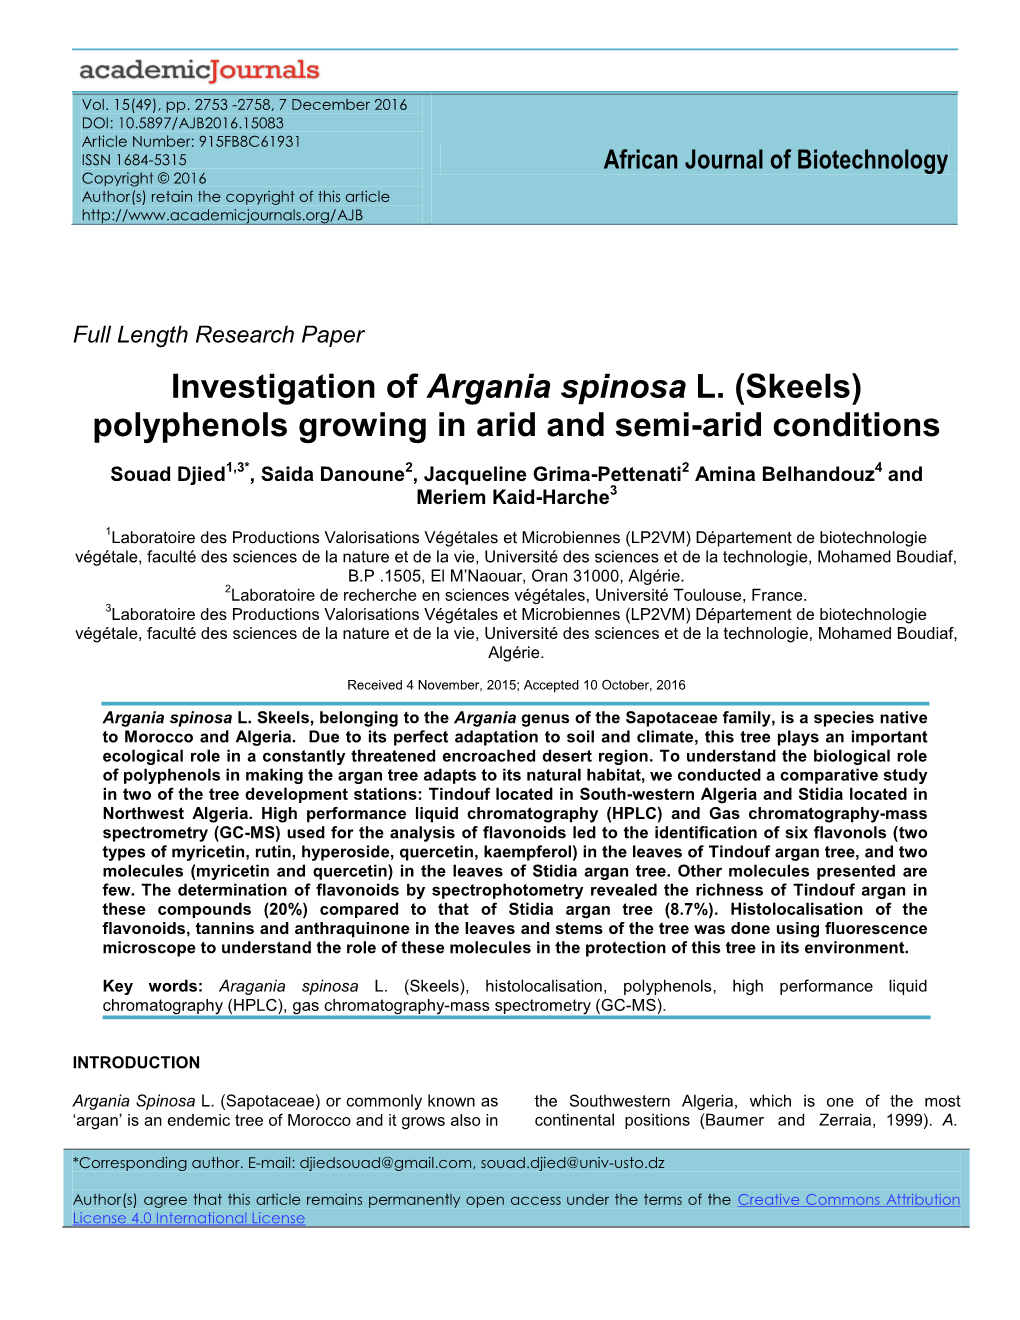 Investigation of Argania Spinosa L. (Skeels) Polyphenols Growing in Arid and Semi-Arid Conditions